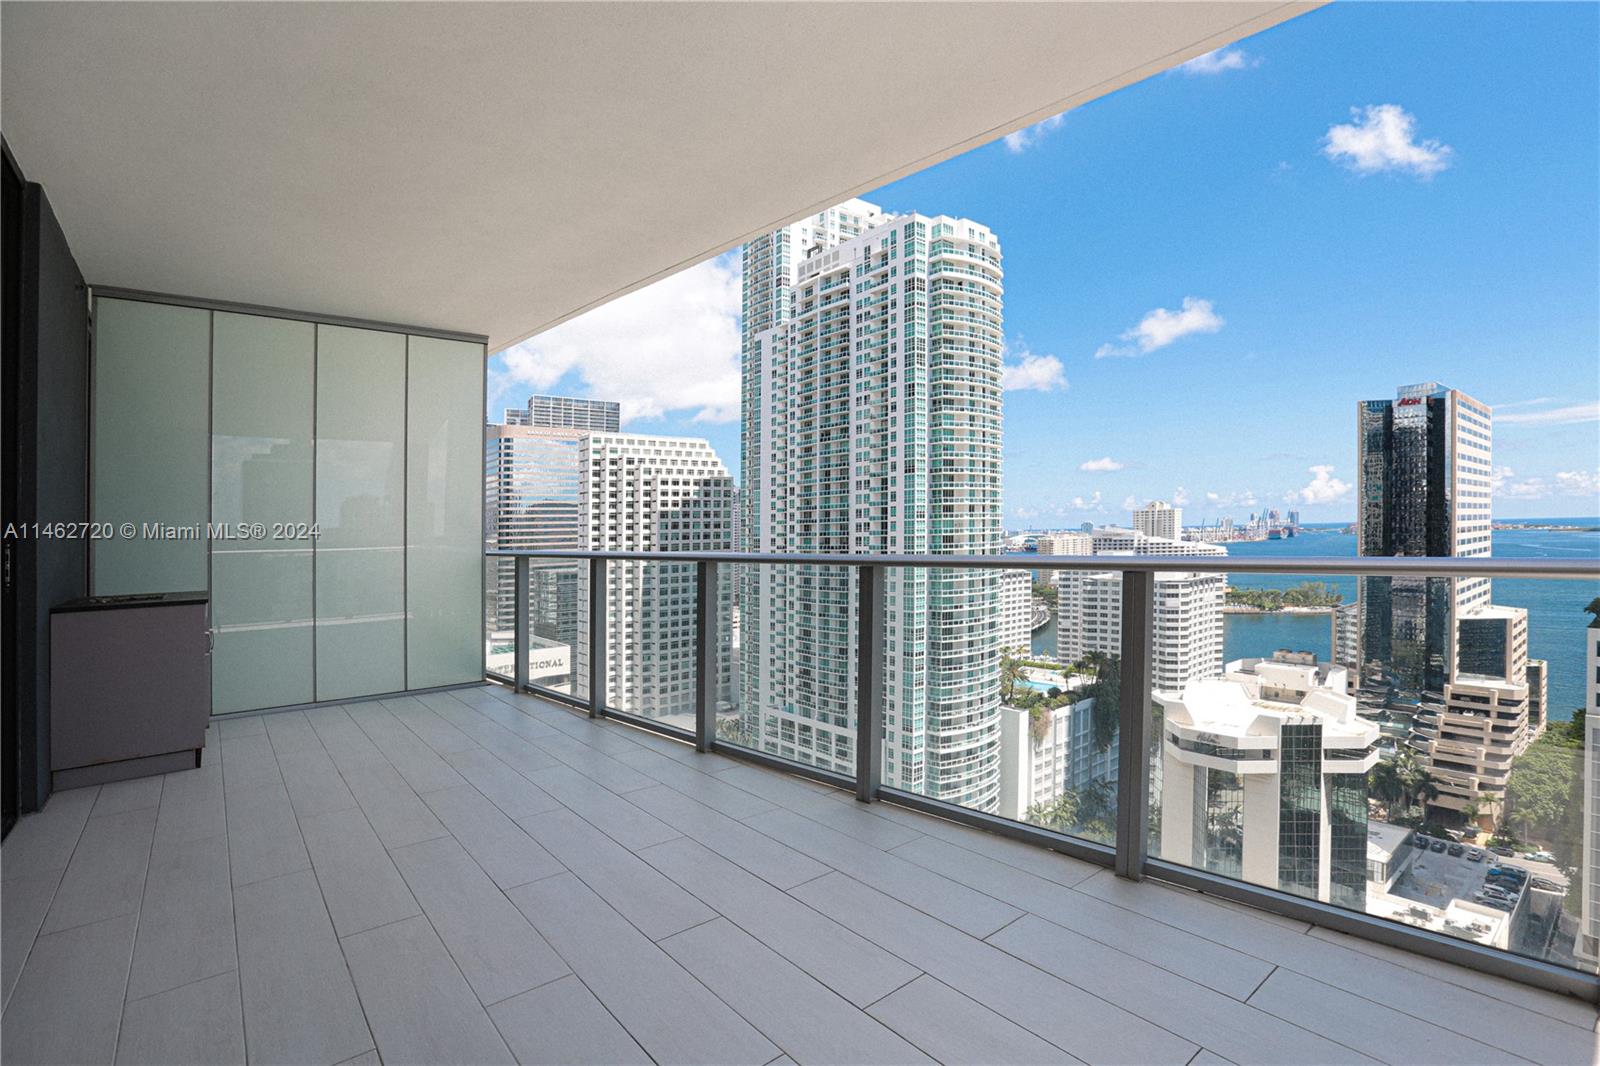 Gorgeous 3 Bedroom + Den, 3 Bath corner unit at 1010 Brickell! This spacious corner apartment is the perfect place to call home. With an oversized den that welcomes you as you enter, you'll have plenty of space to relax and entertain guests. The split bedroom layout provides privacy for everyone, and the private elevator ensures that you can come and go in style. The oversized balcony with a built-in electric grill is perfect for enjoying the cool breeze off Biscayne Bay and the stunning views of the city. Floor-to-ceiling windows let you take in the view from every angle. 1010 Brickell has some of the best amenities in the city, including an indoor pool, sky pool and bites, basketball court, and running track.